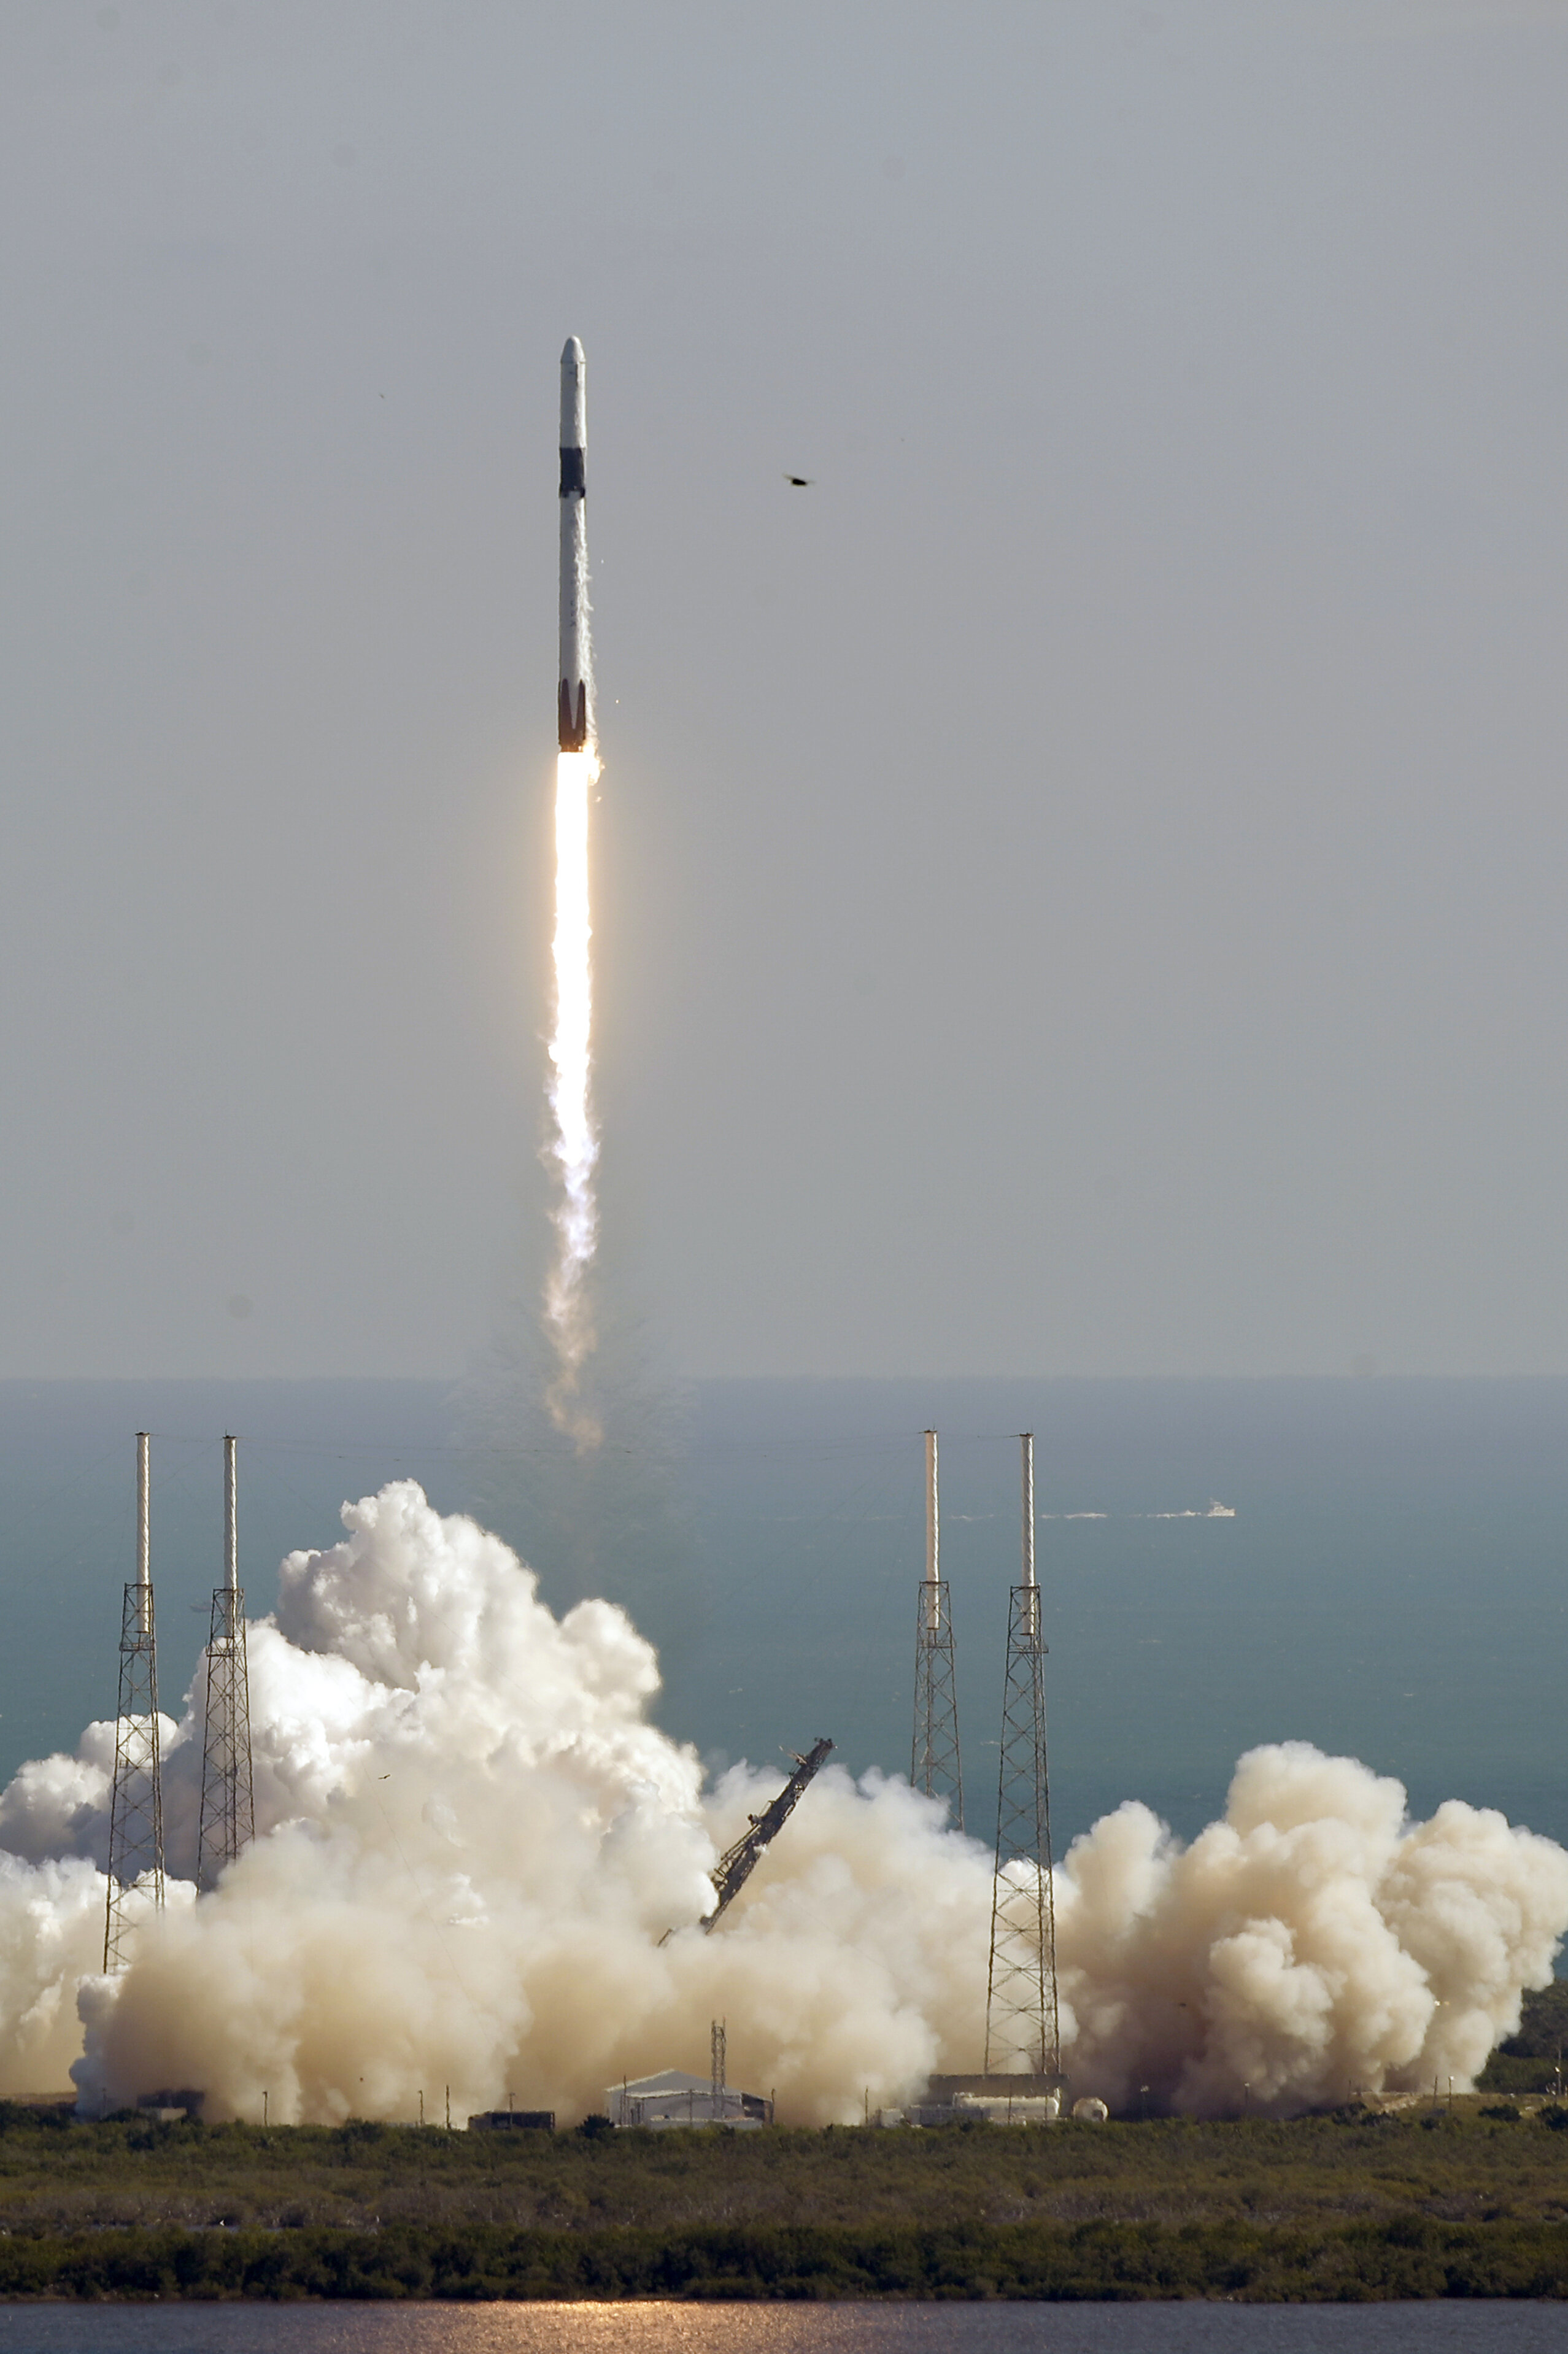 Falcon 9 SpaceX rocket on a resupply mission to the ISS. (AP Photo/John Raoux)